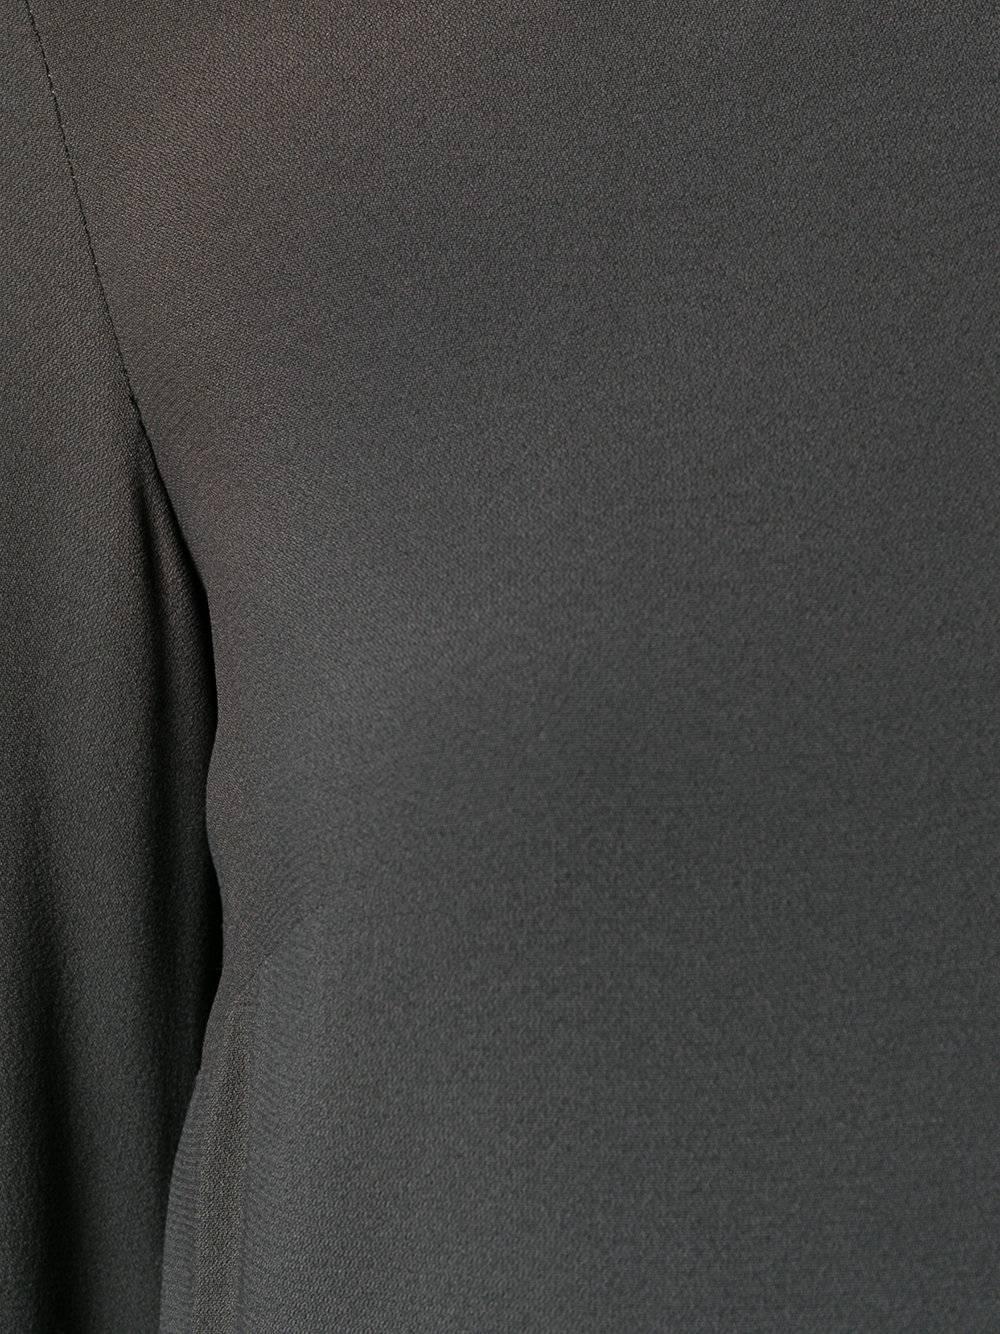 Dark grey dress from Maison Martin Margiela  featuring a round neck, long sleeves and a frayed hem.
Made in Italy.
Composition
Acetate 51%
Composition
Viscose 49%
Washing Instructions:
Dry Clean Only